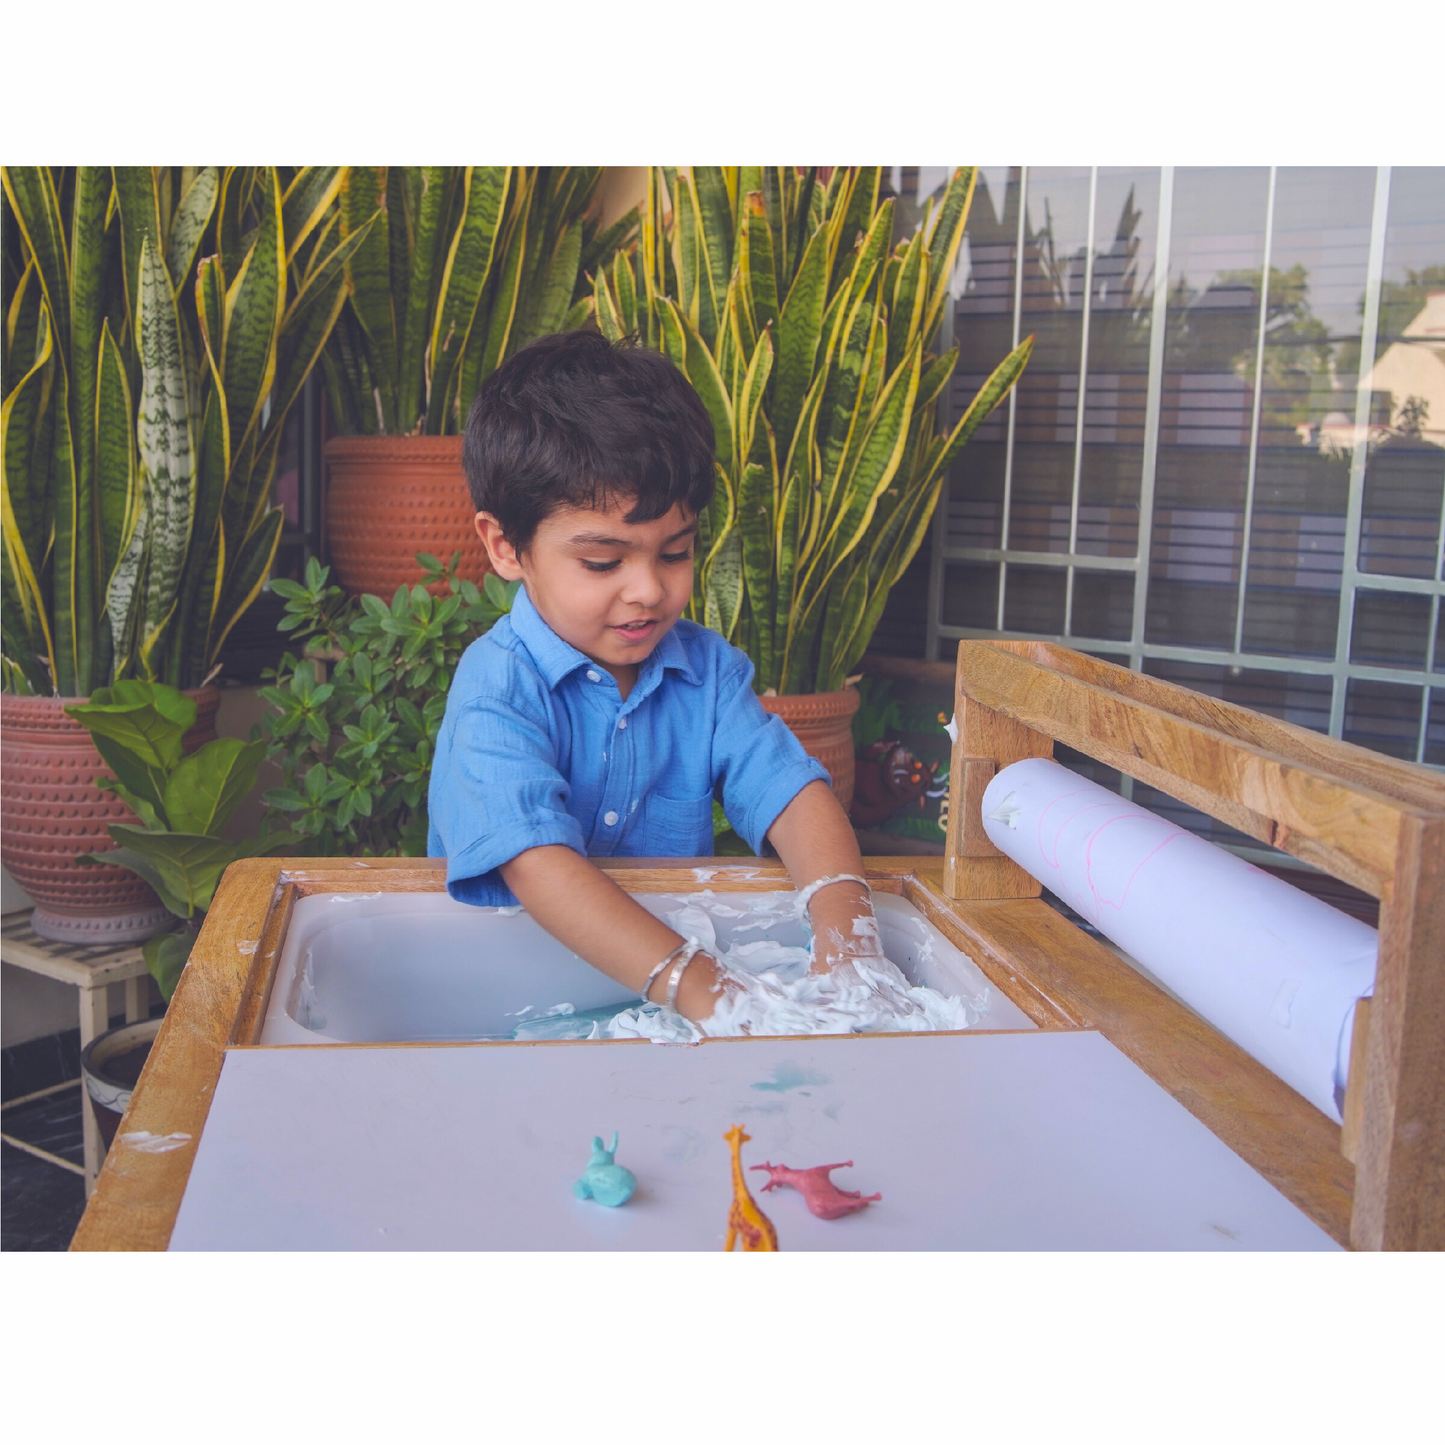 Sensory - Art - Study Table | Flisat Table for Toddlers | Activity Table with Bins and White board | Sensory Development Play | Montessori Inspired | Sand Play | Water Play | Child Safe | Non Toxic Paints